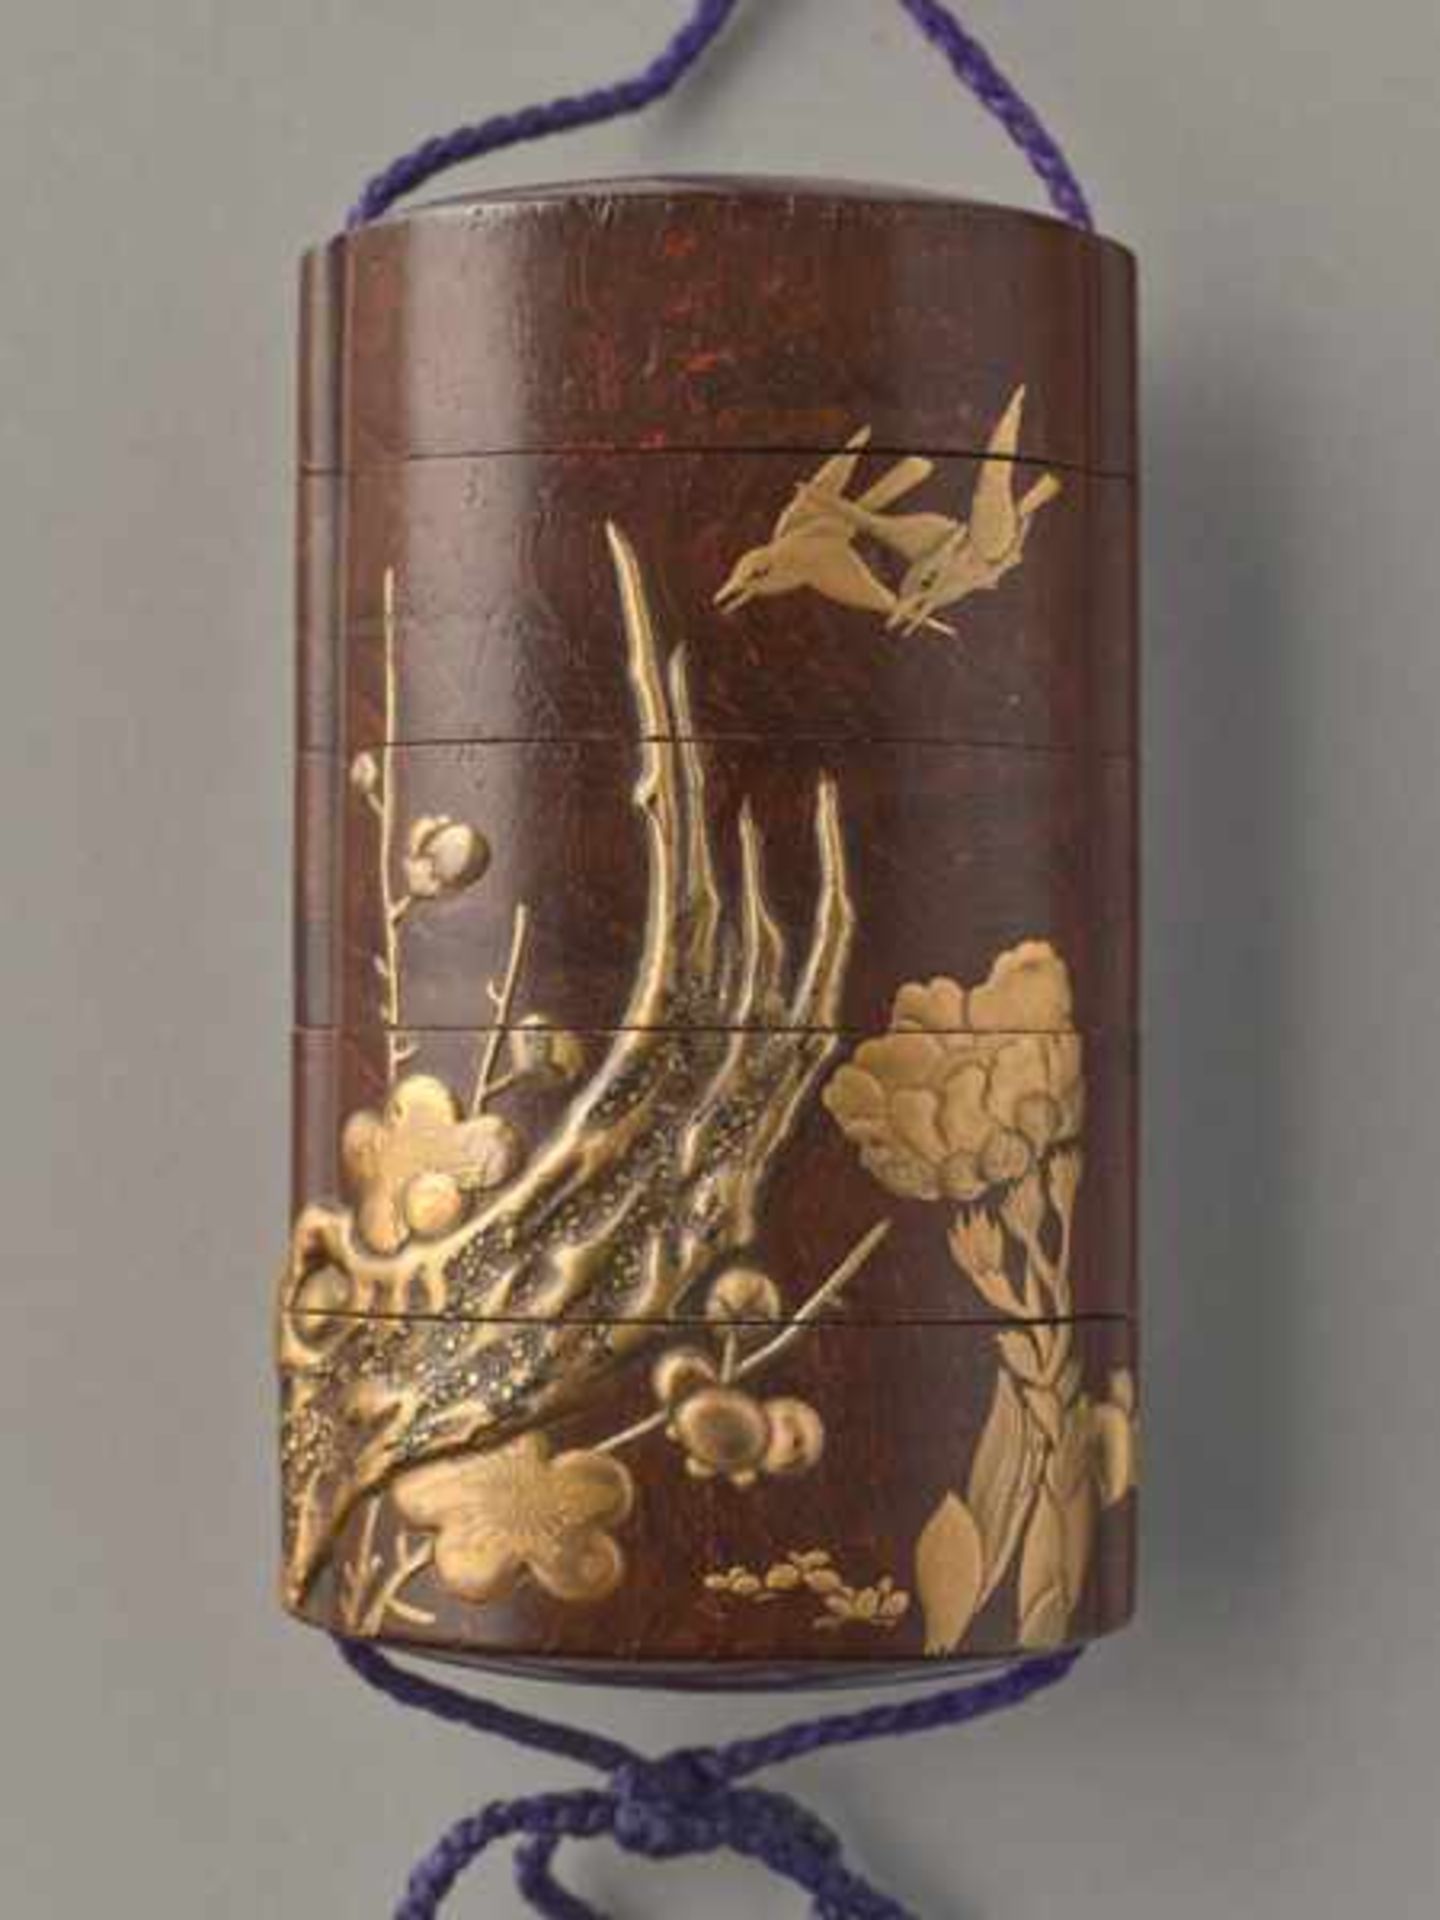 A FOUR CASE LACQUER AND GOLD INRO BY HOSHIN Lacquer and gold inro with some silver. Japan, late 18th